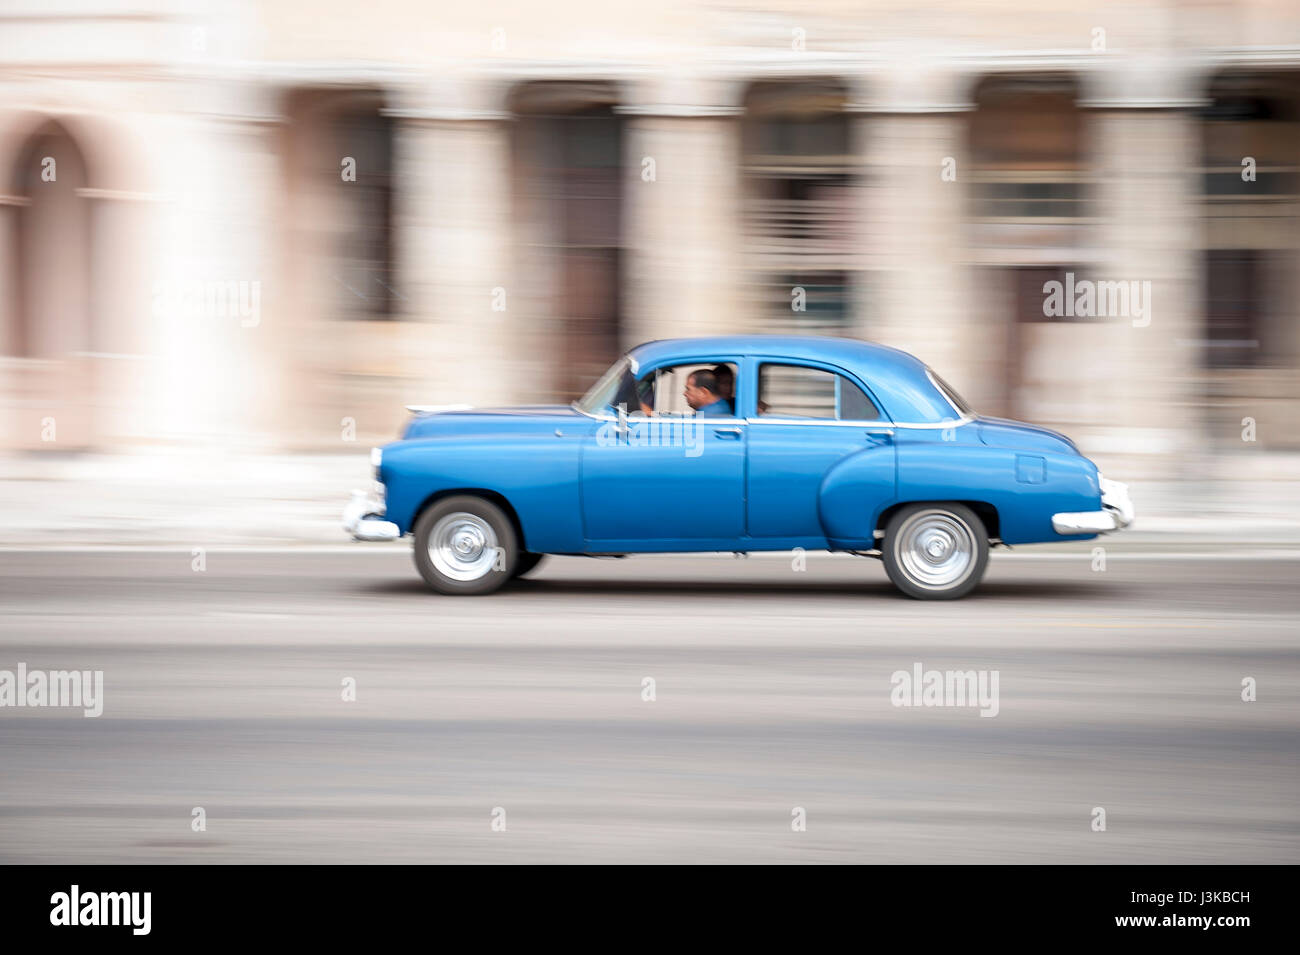 Classic blue American car serving as taxi drives in front of classic colonial architecture on the Malecon in Central Havana, Cuba Stock Photo